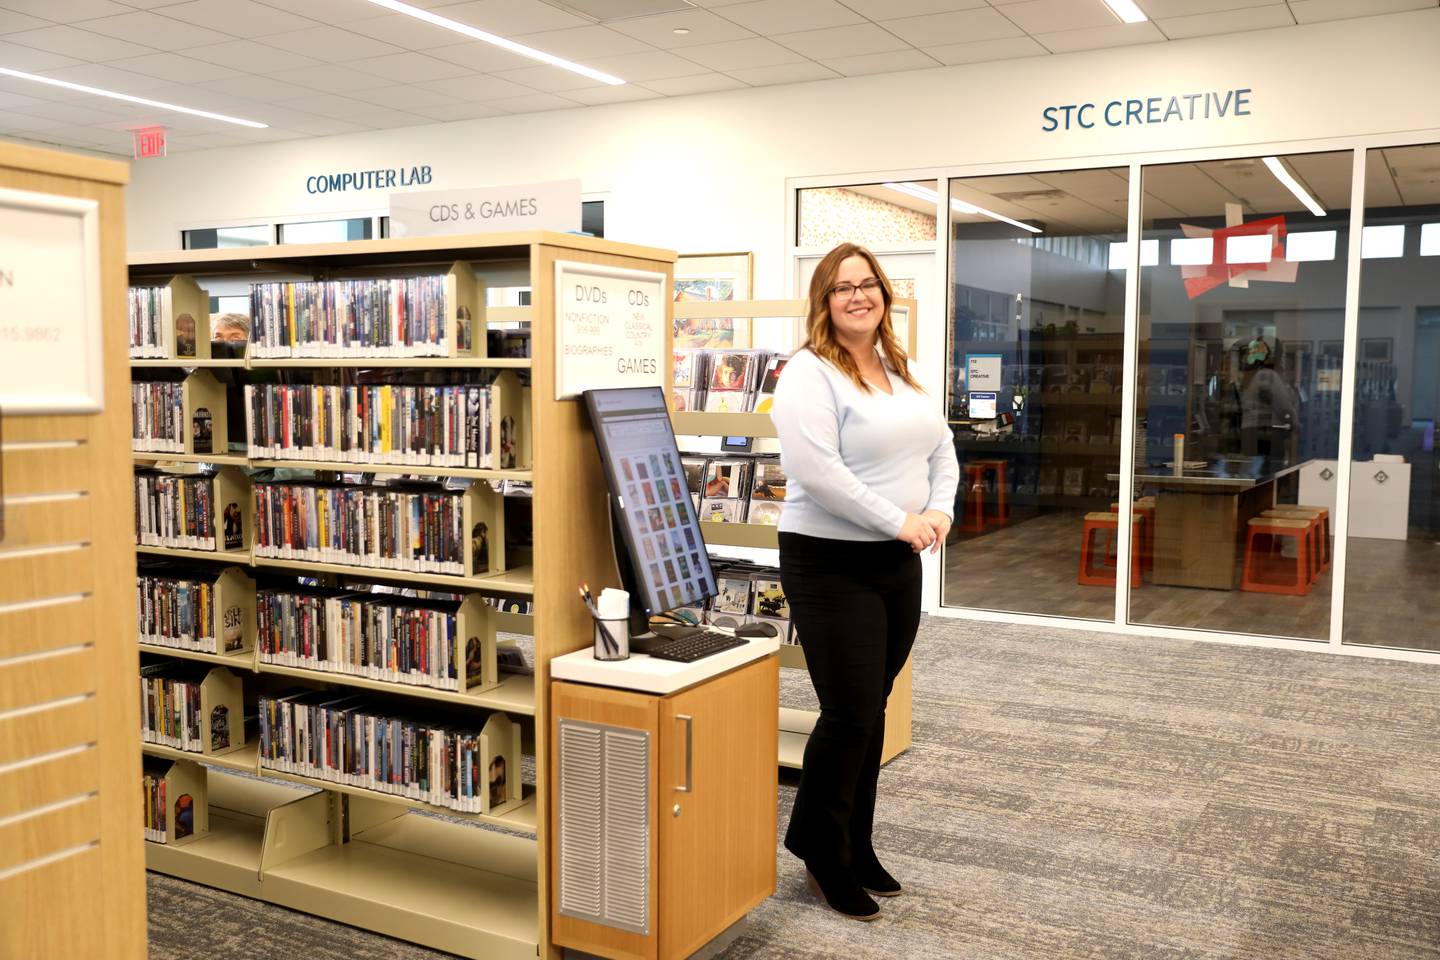 Kate Buckson recently began her role of director of the St. Charles Public Library. For the past seven years, she served as the executive director of the La Grange Park Public Library District.